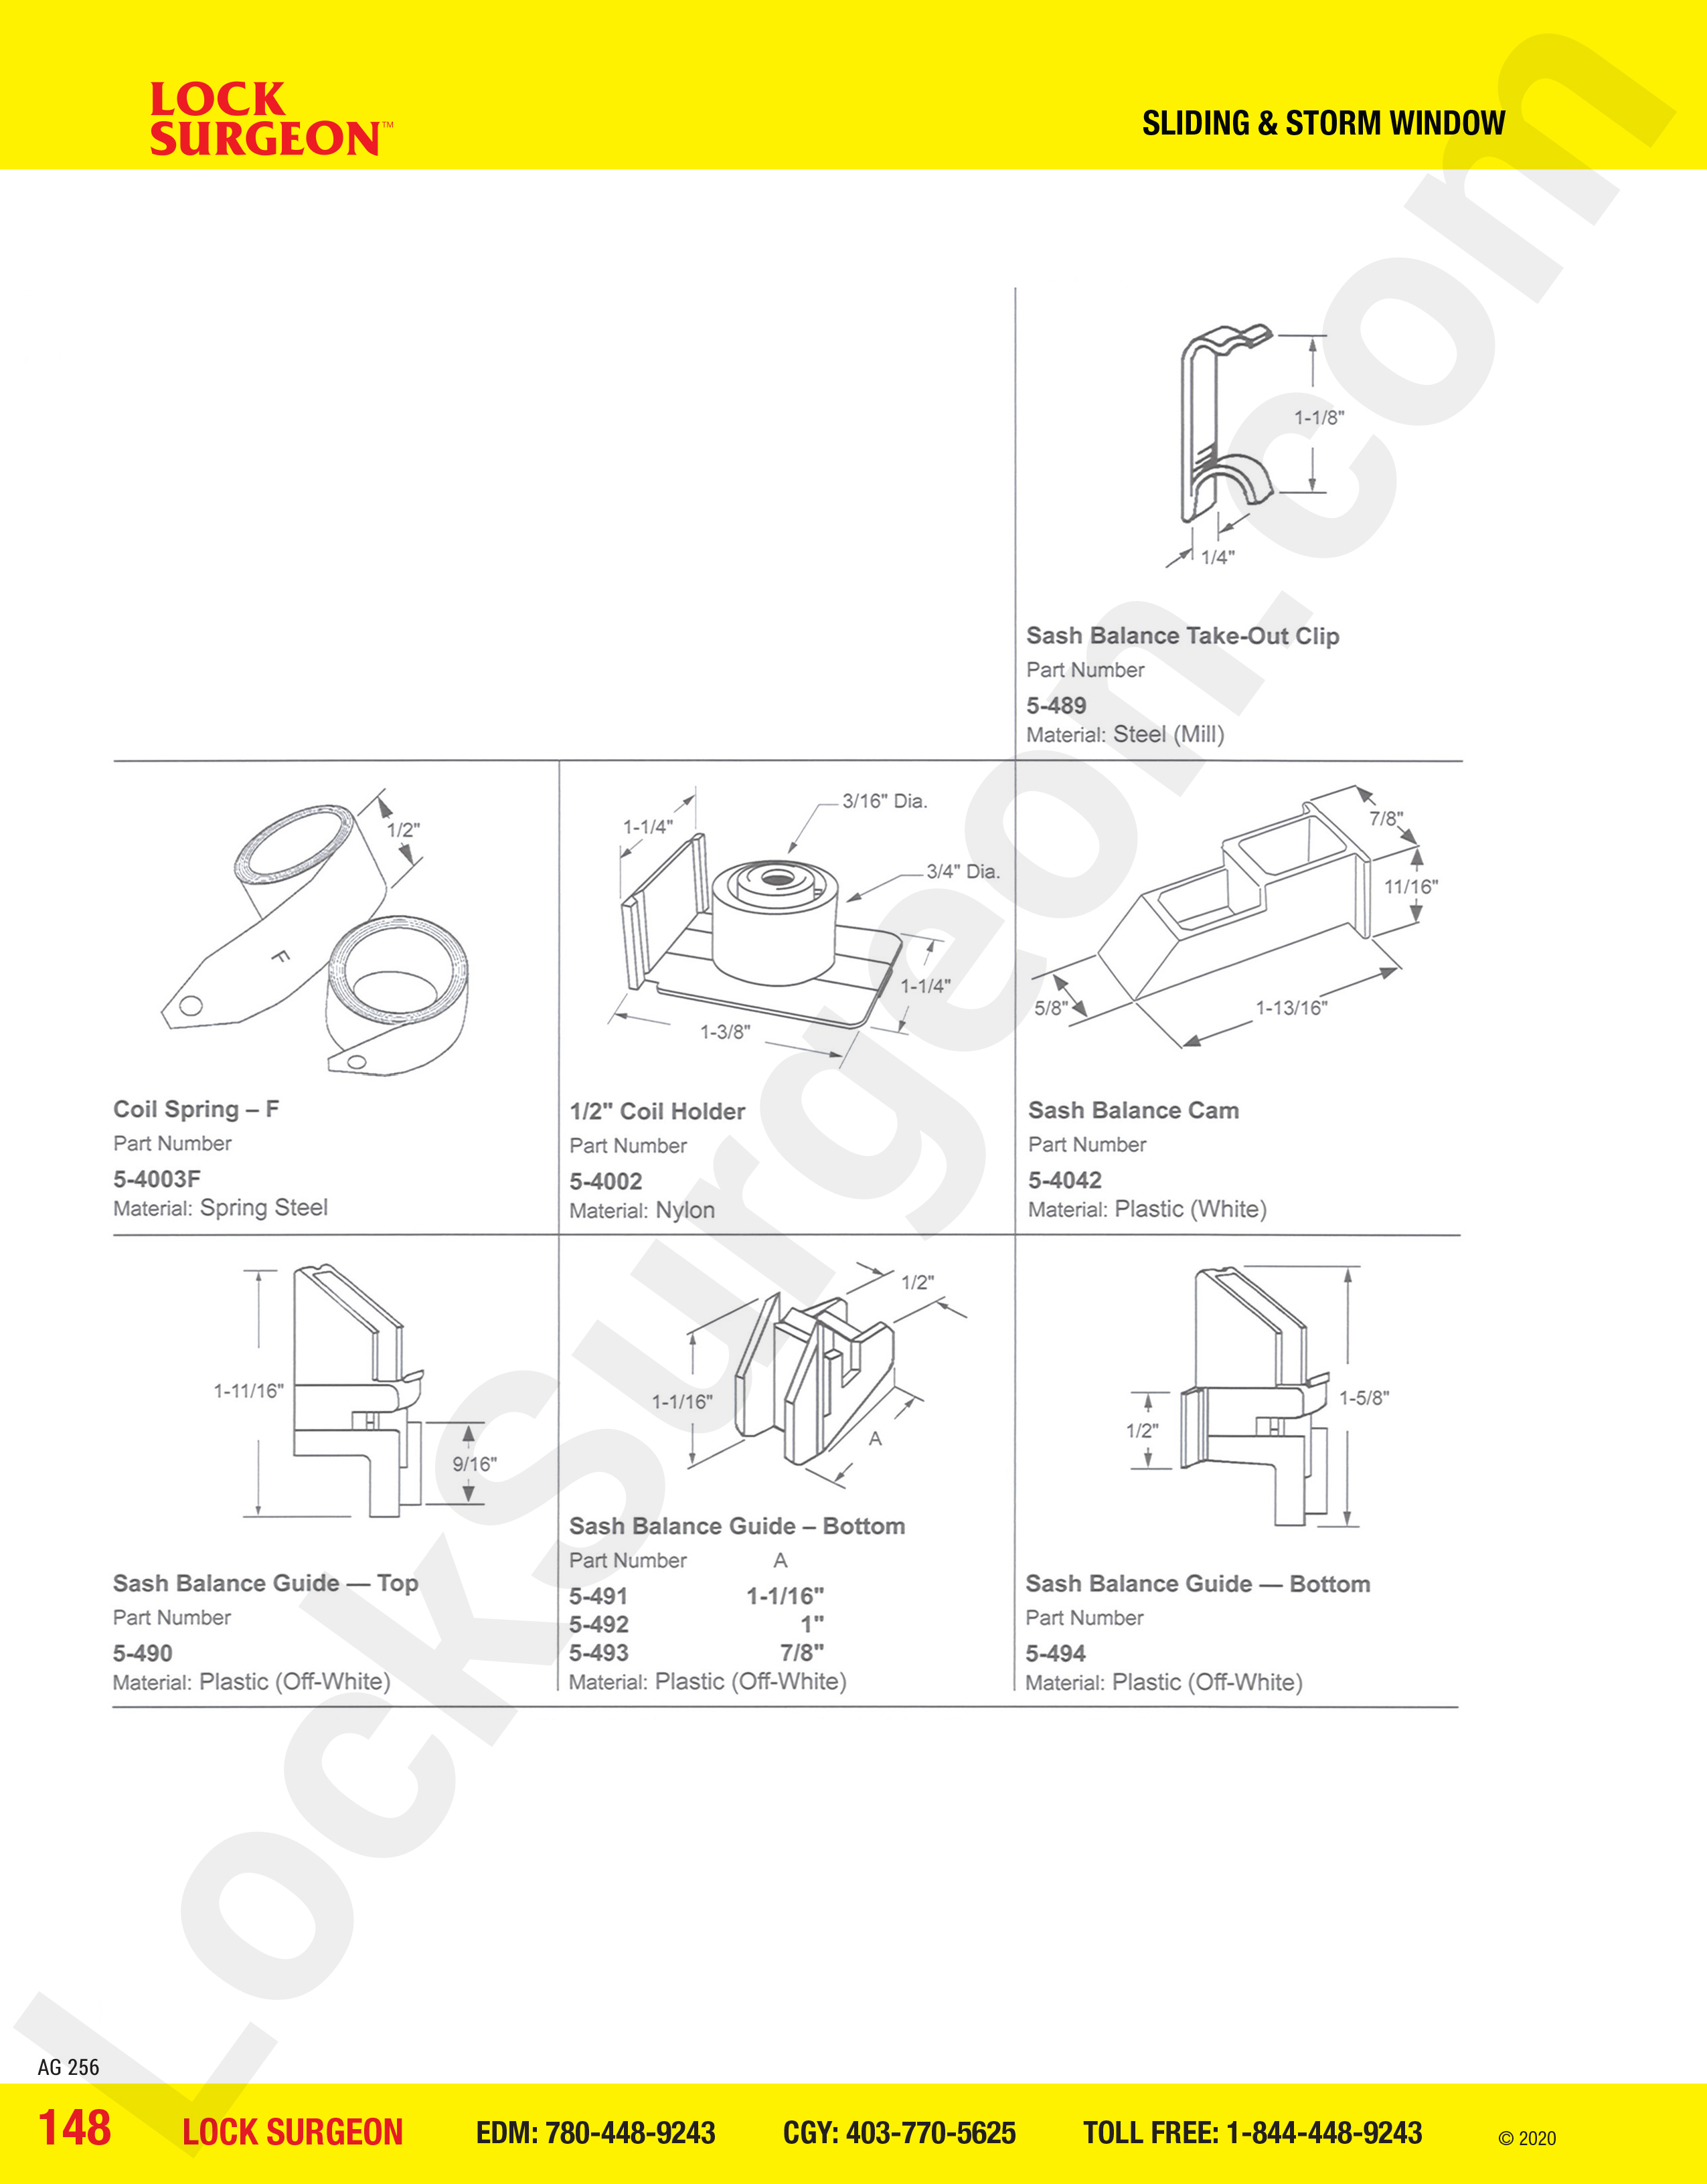 Sliding & Storm Window coils & guides, sash balance takeout clips, coil springs & coil holders.